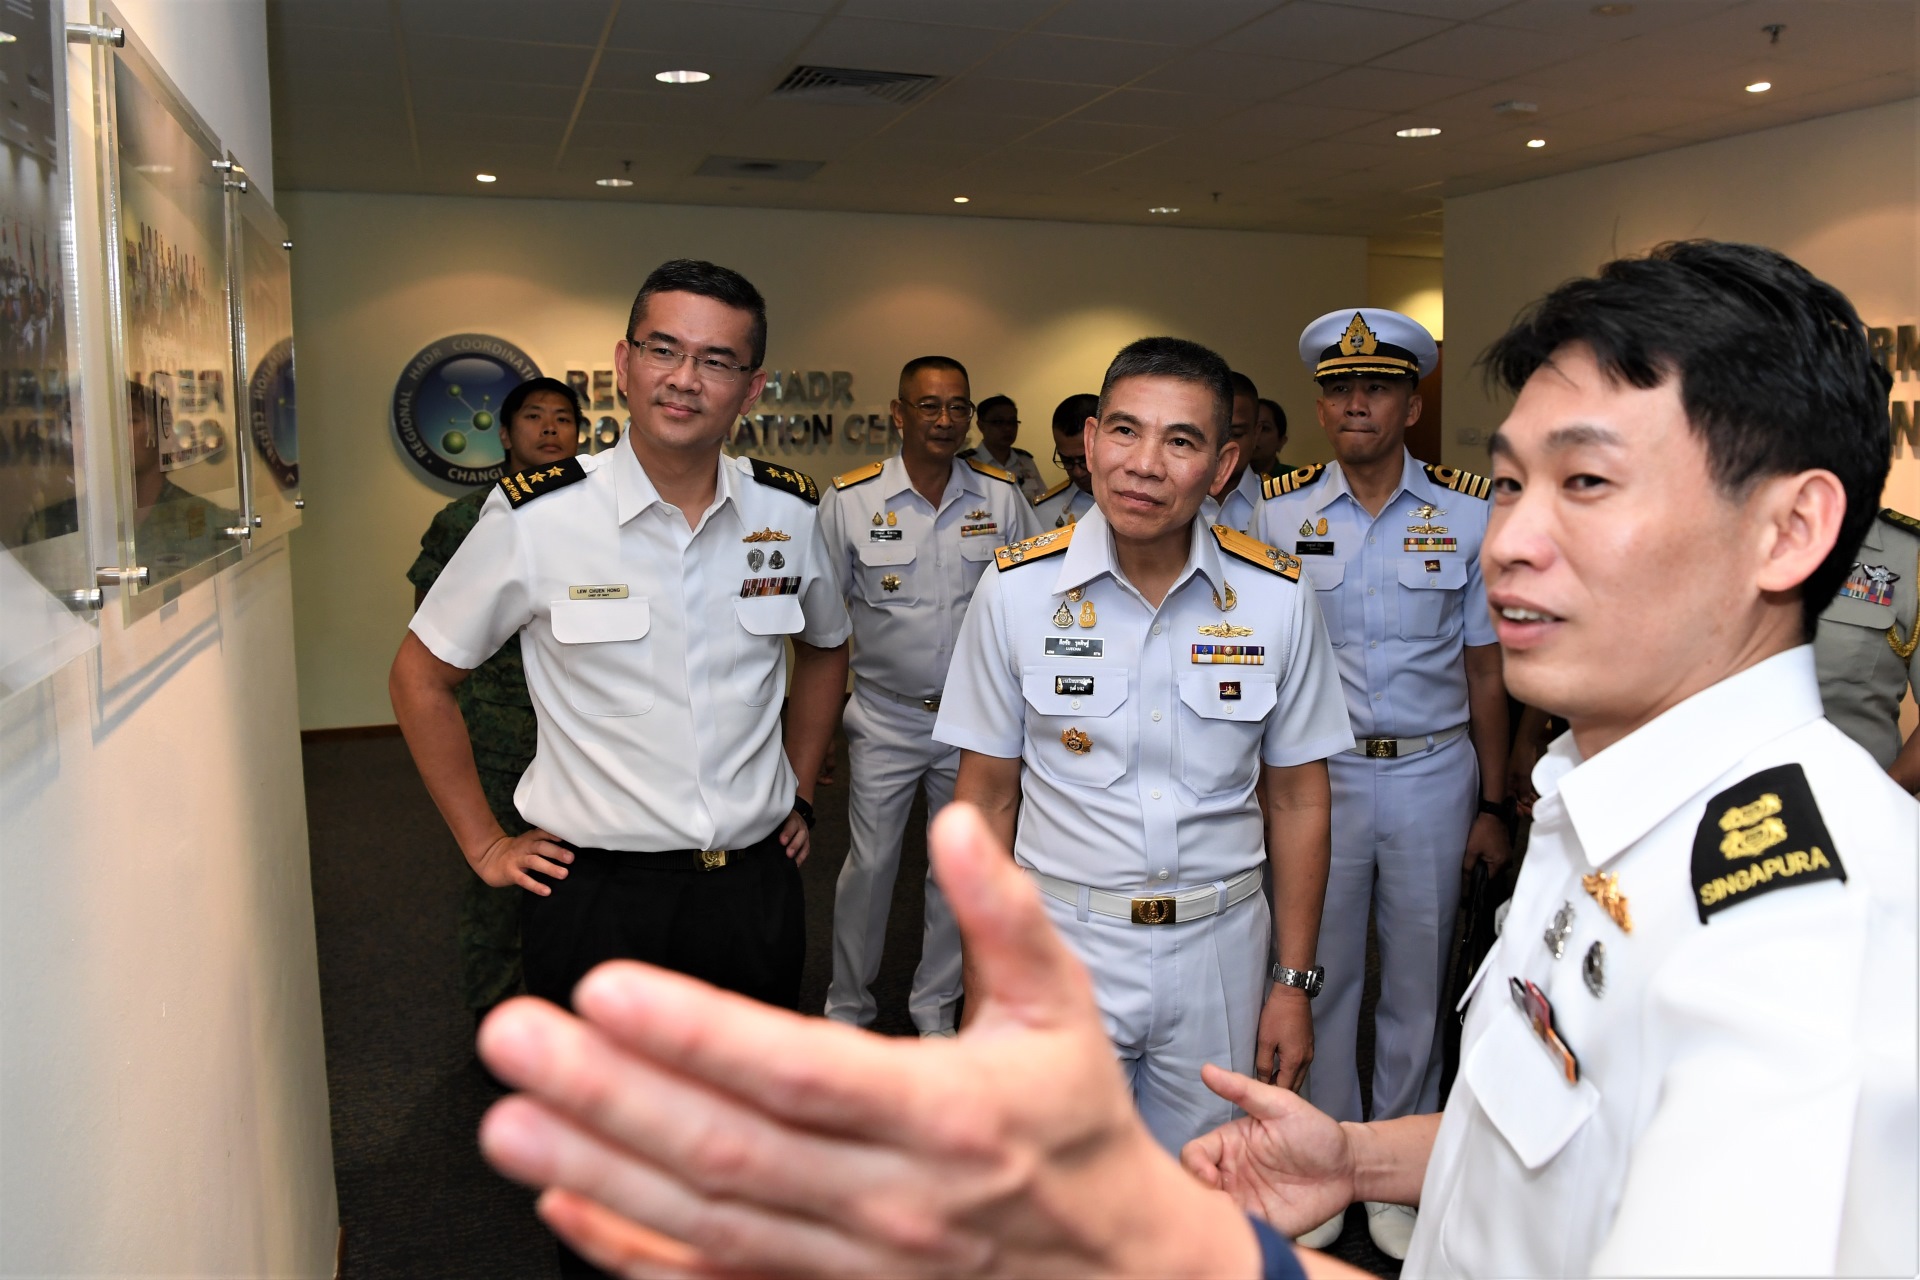 ADM Luechai (second from left), accompanied by Chief of Navy Rear-Admiral Lew Chuen Hong (left), receiving a brief at the Information Fusion Centre at RSS Singapura - Changi Naval Base this afternoon.